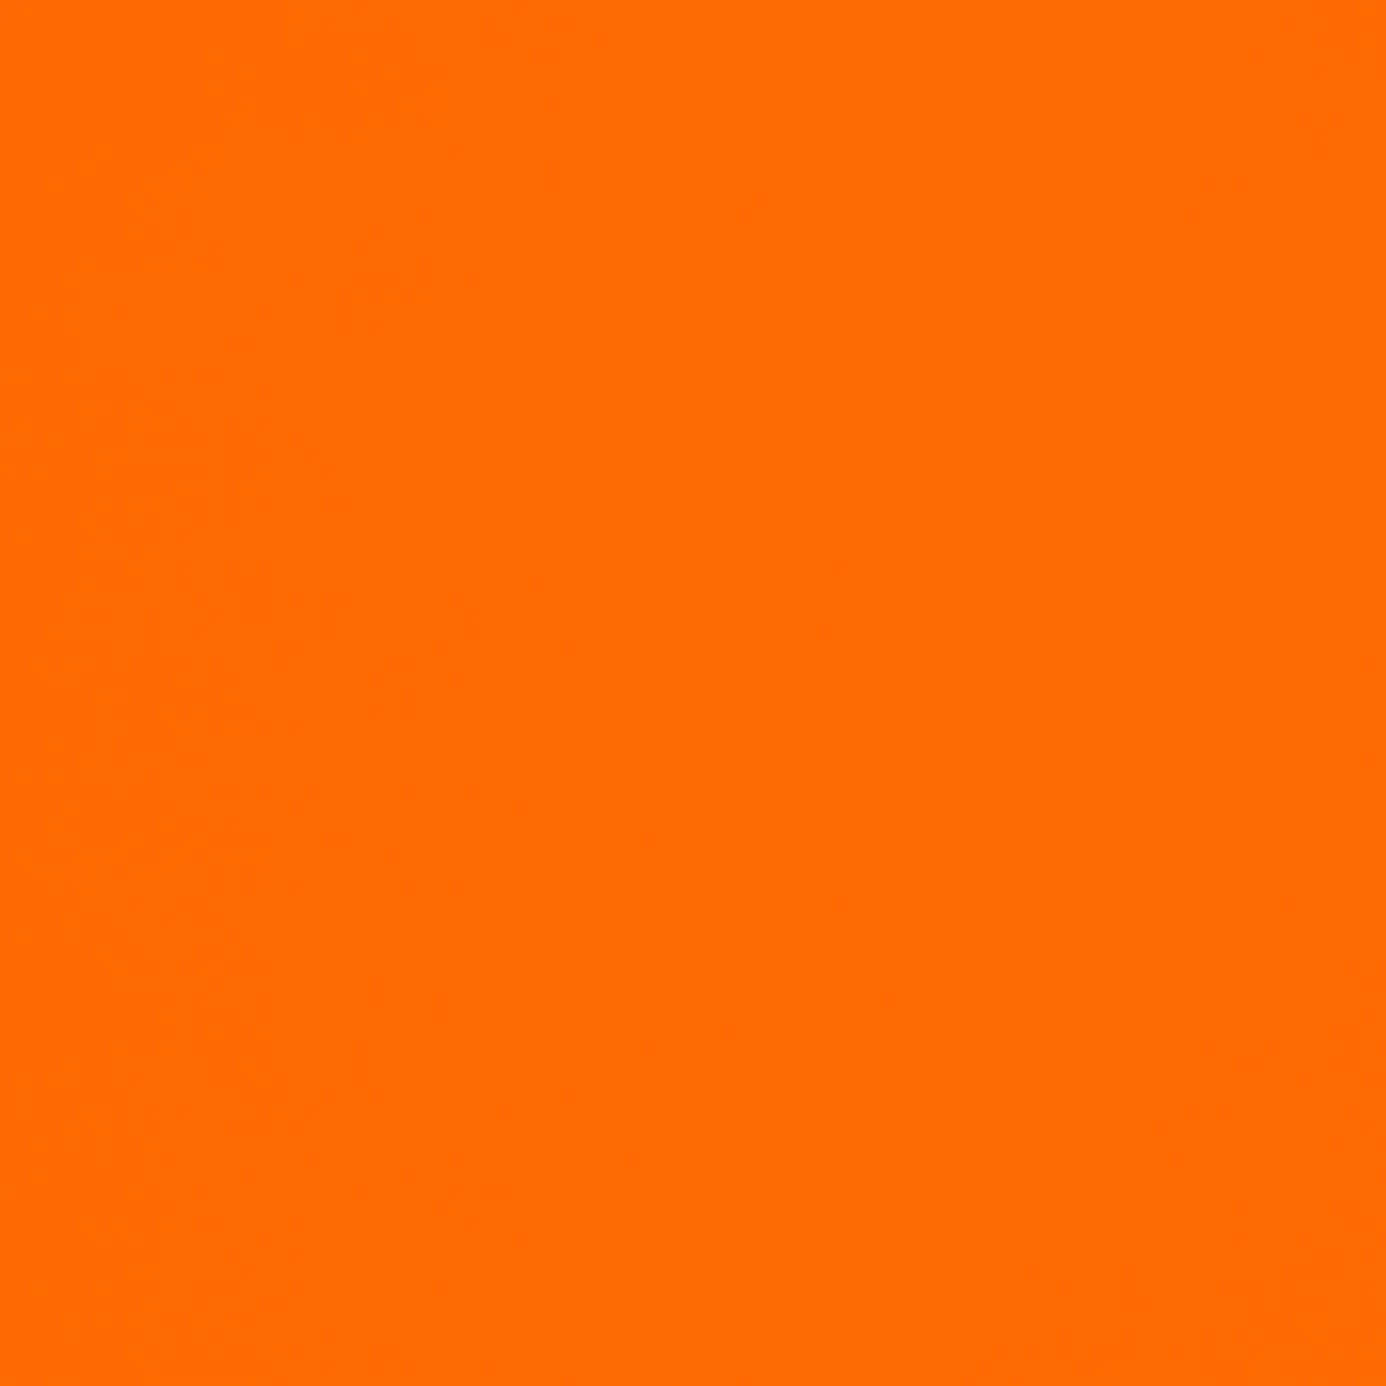 A bright and lively orange pattern Wallpaper